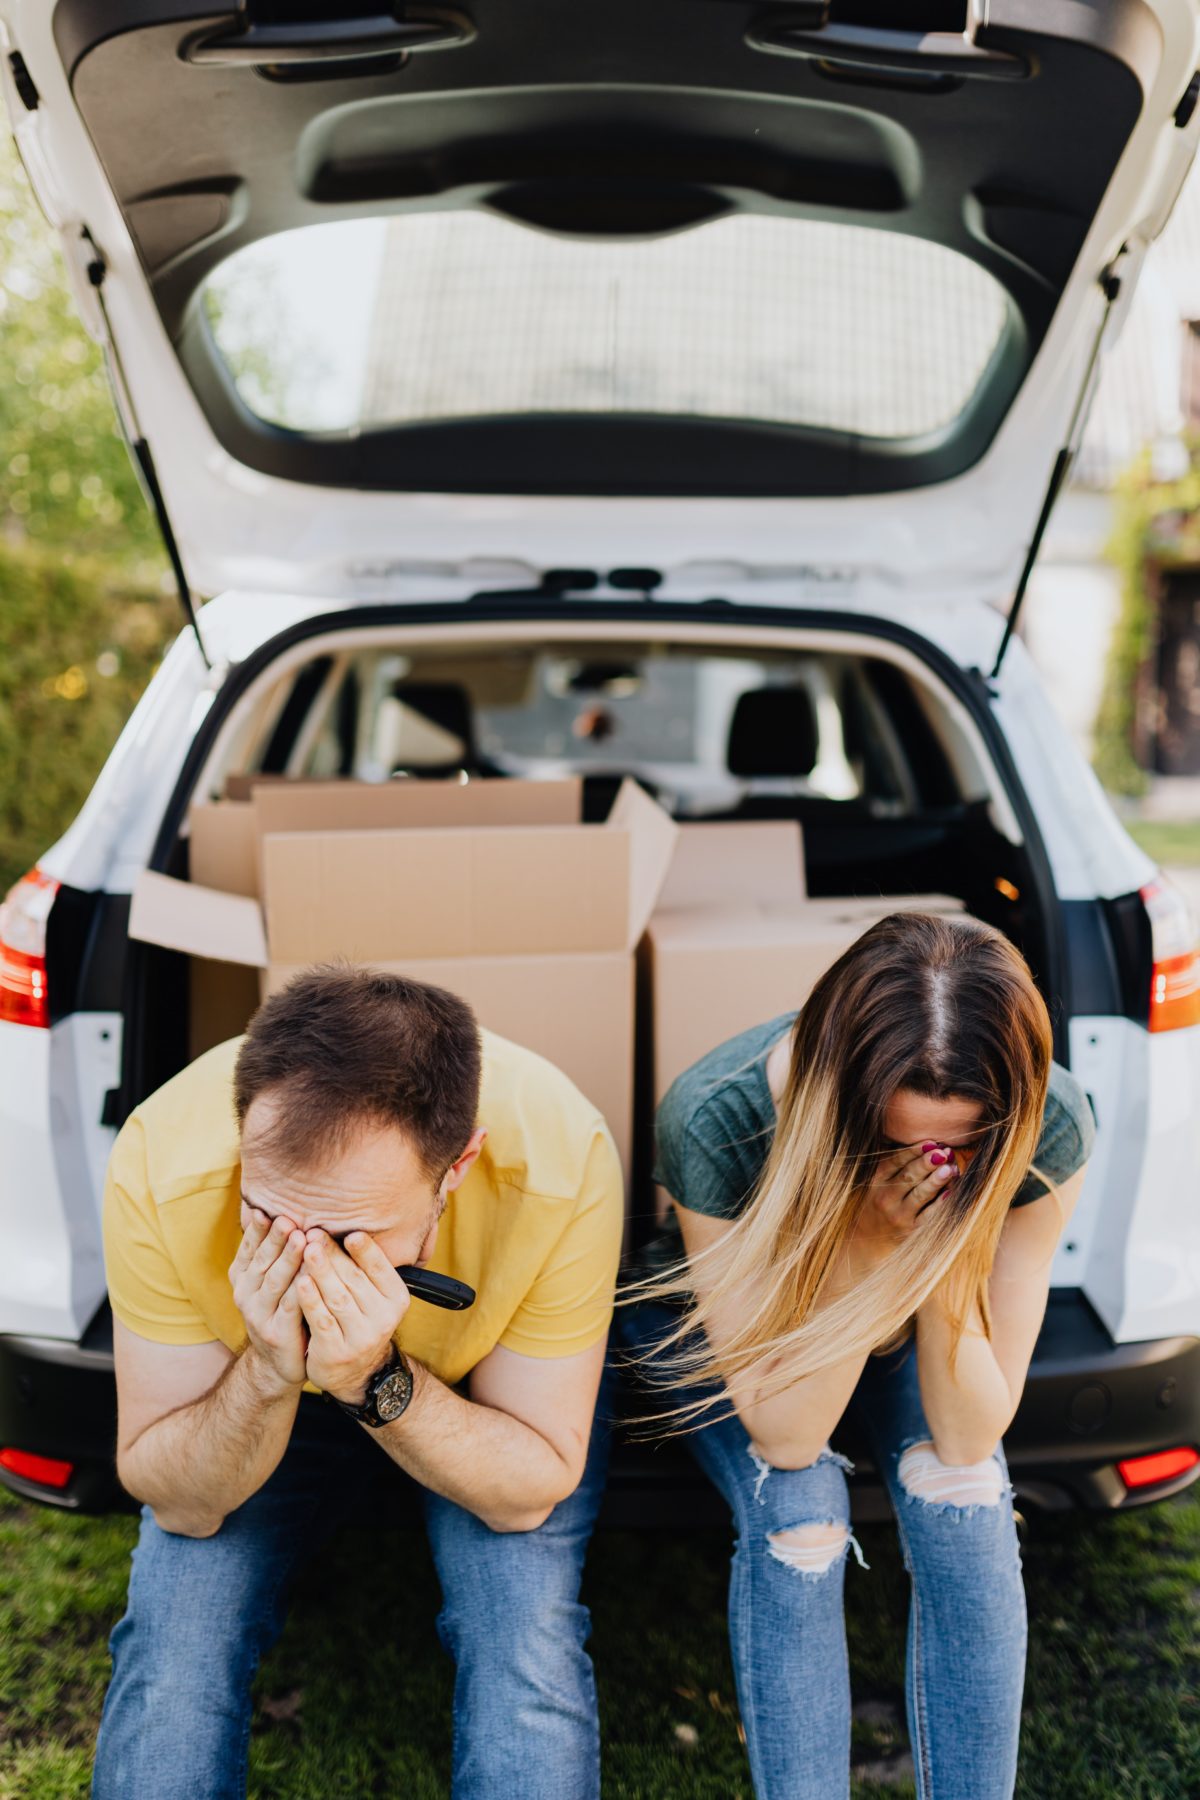 Couple sitting on the back of their vehicle with their heads down and boxes behind them.